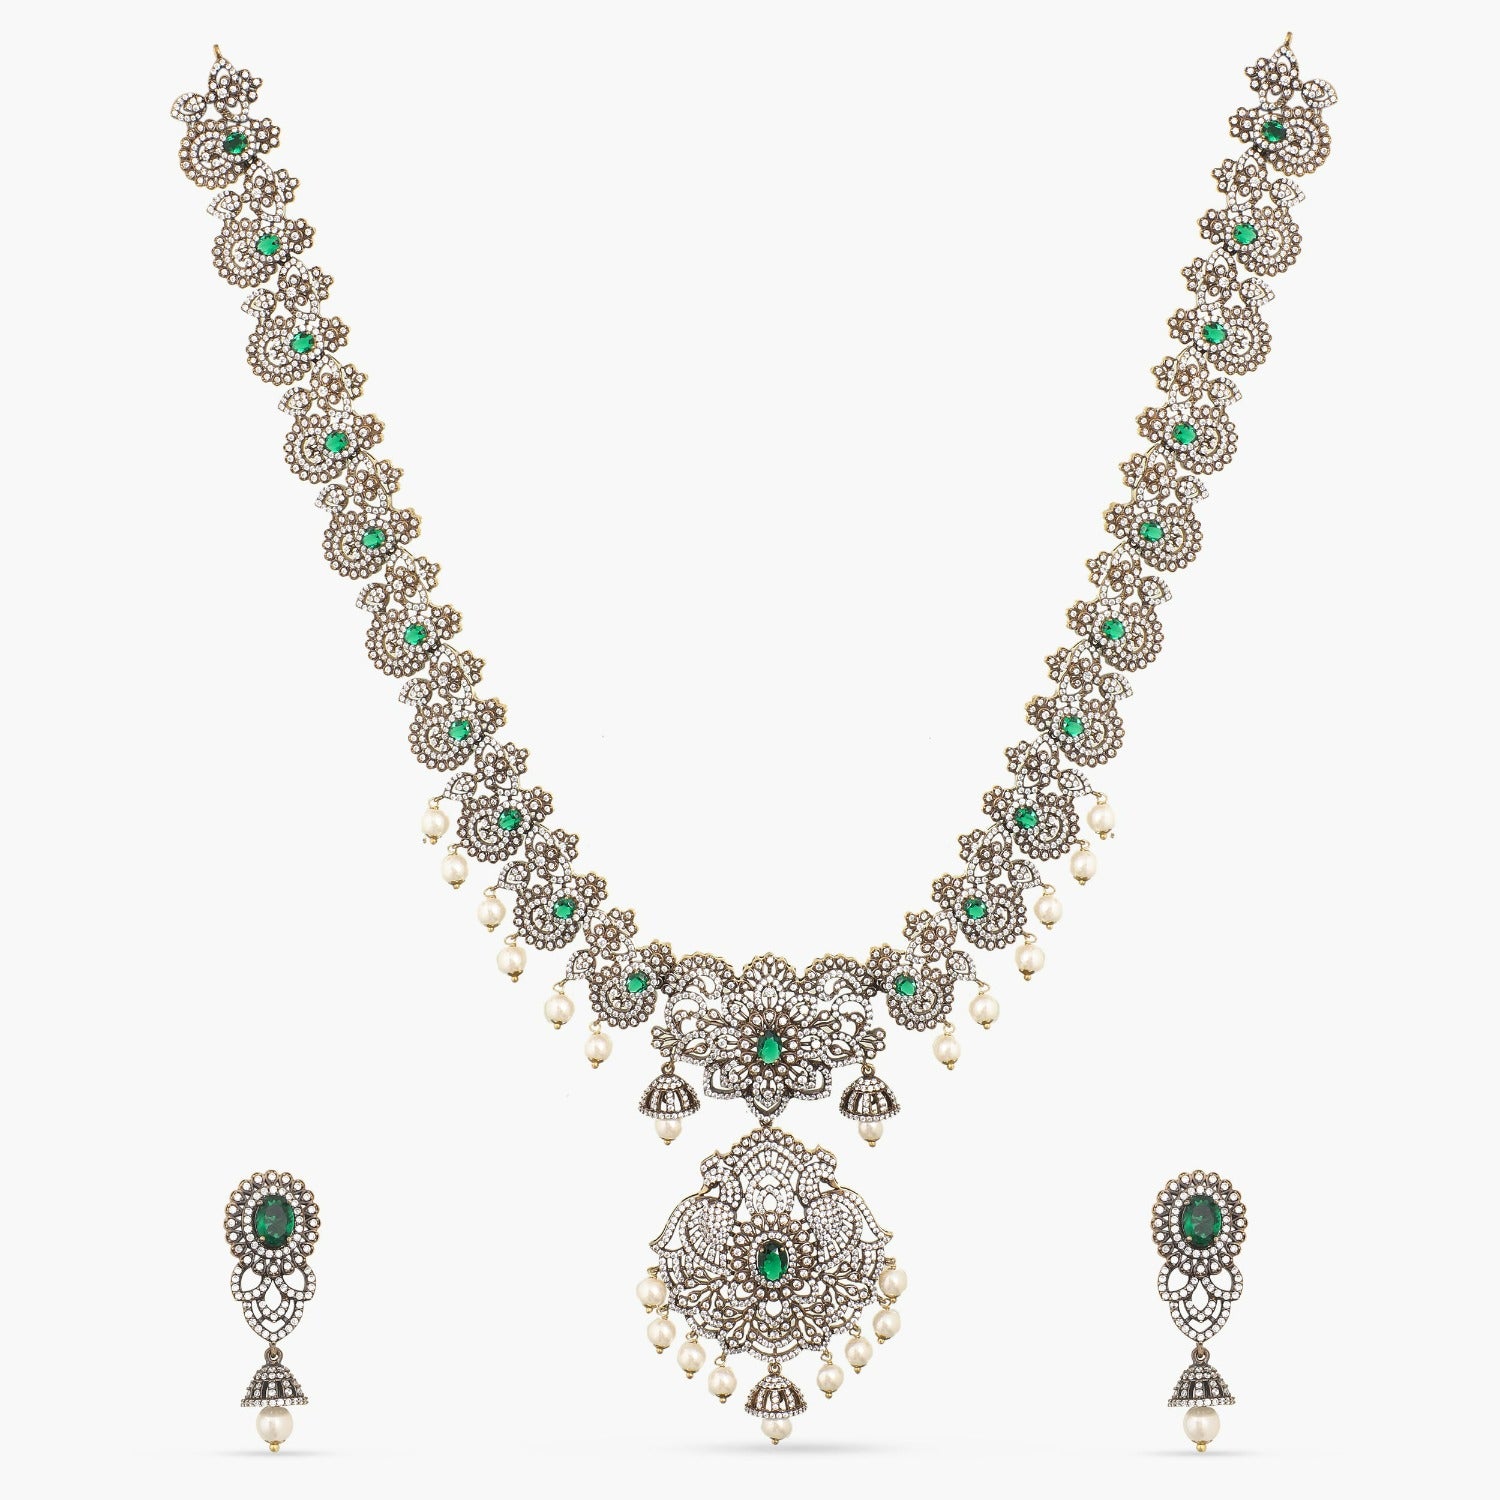 A picture of an Indian artificial jewelry set: an antique plated necklace and earrings set with green gemstones and Cubic Zirconia on a white background.